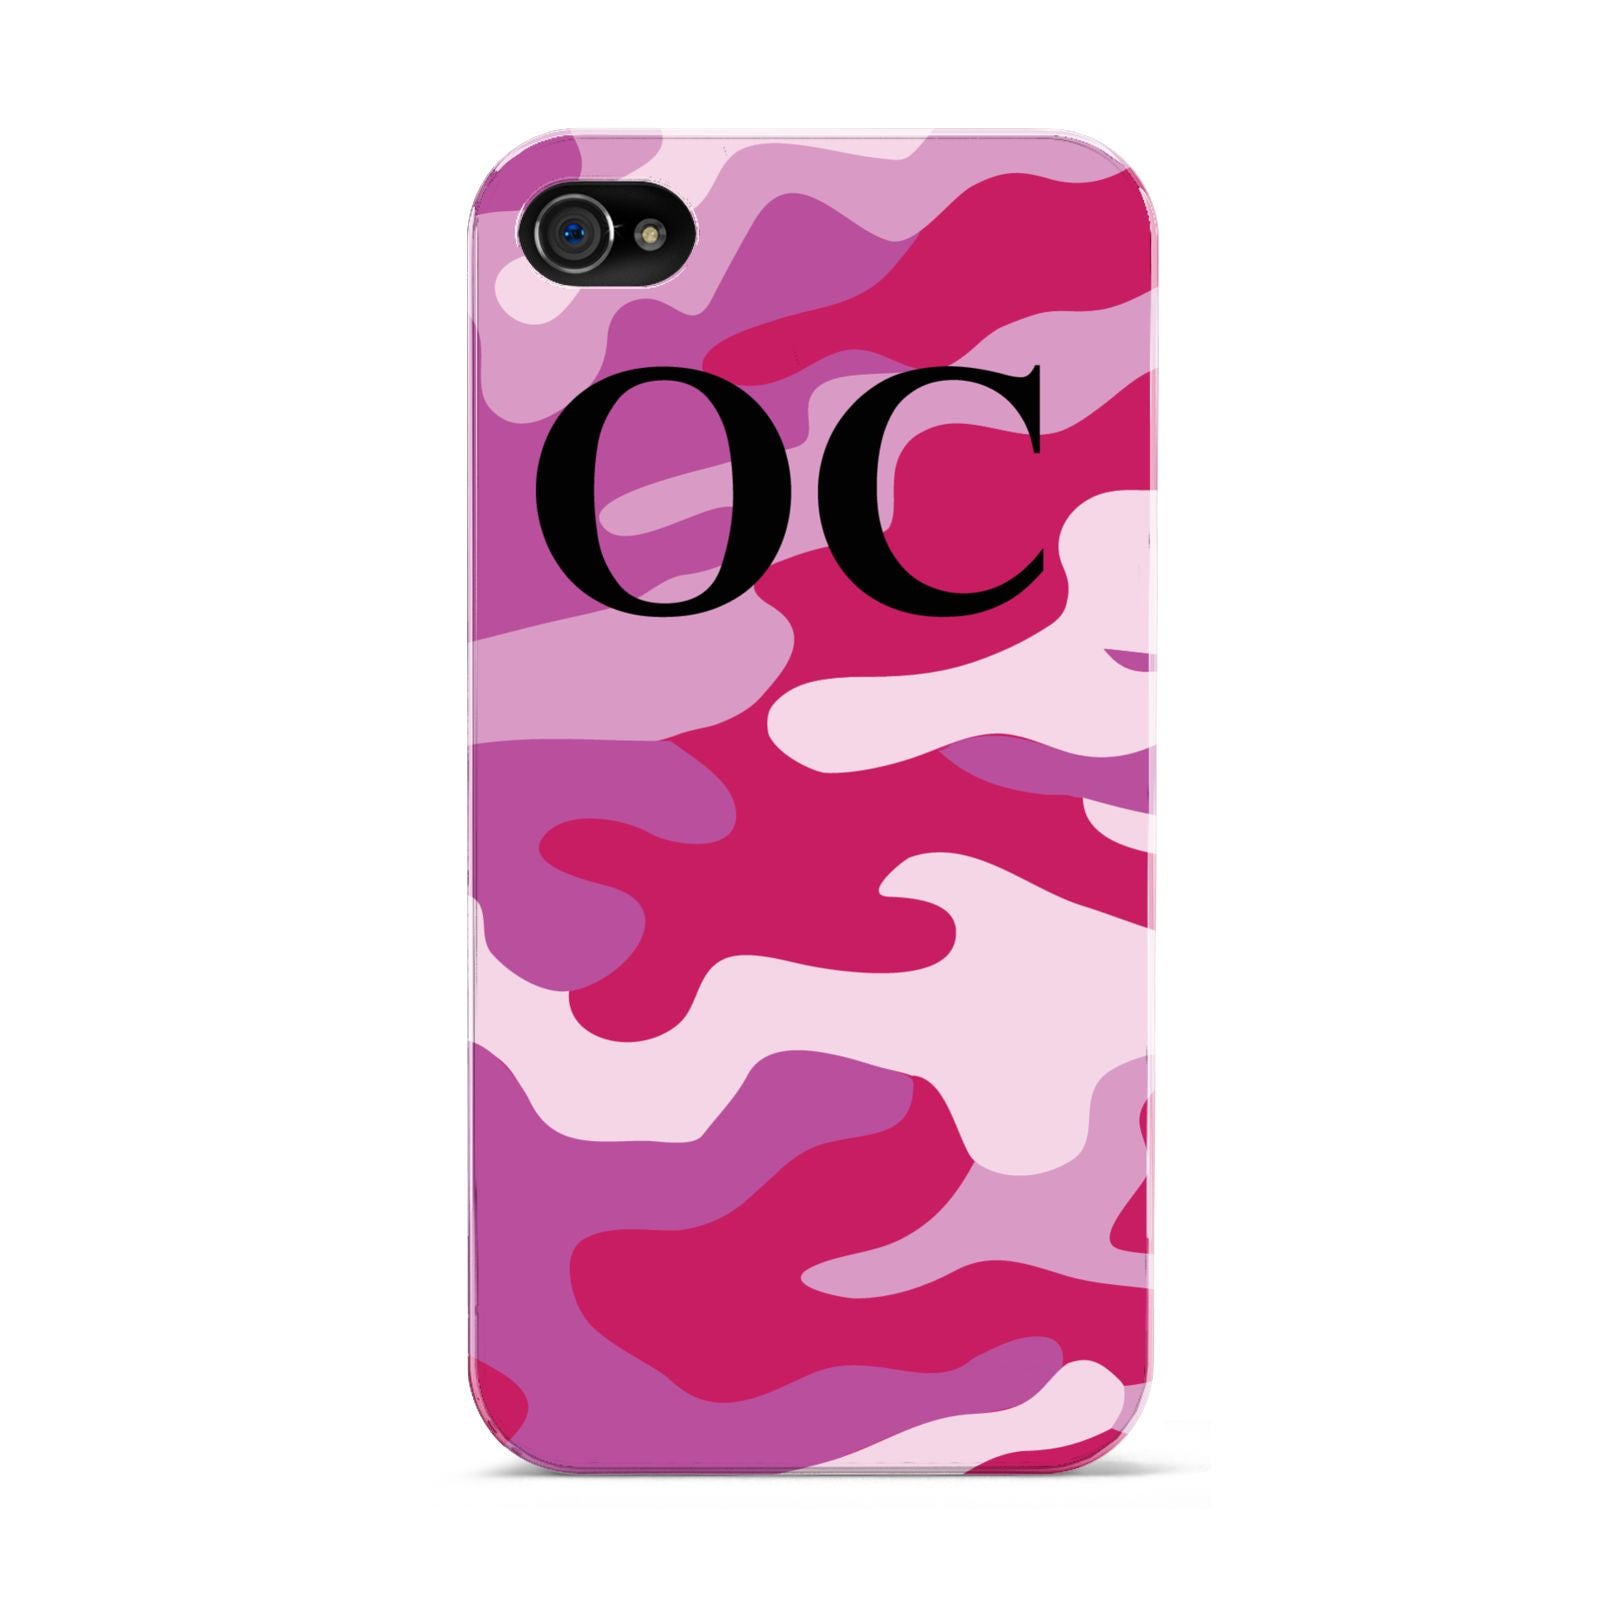 Camouflage Personalised Apple iPhone 4s Case